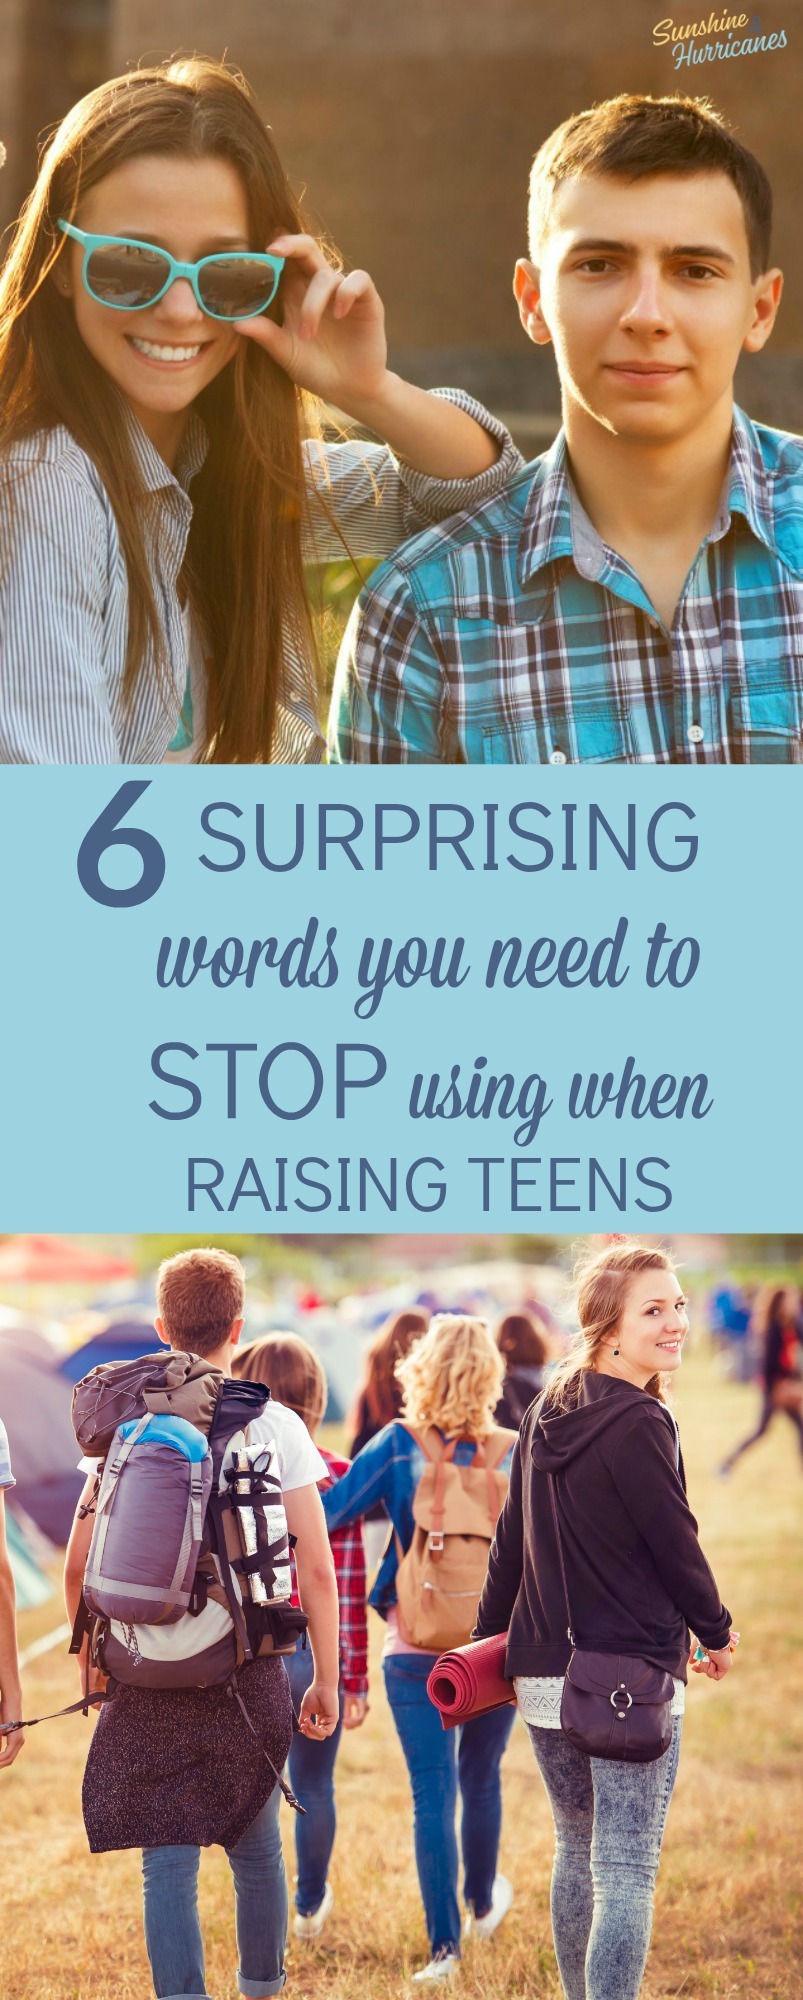 Six surprising words you need to stop using when raising teens